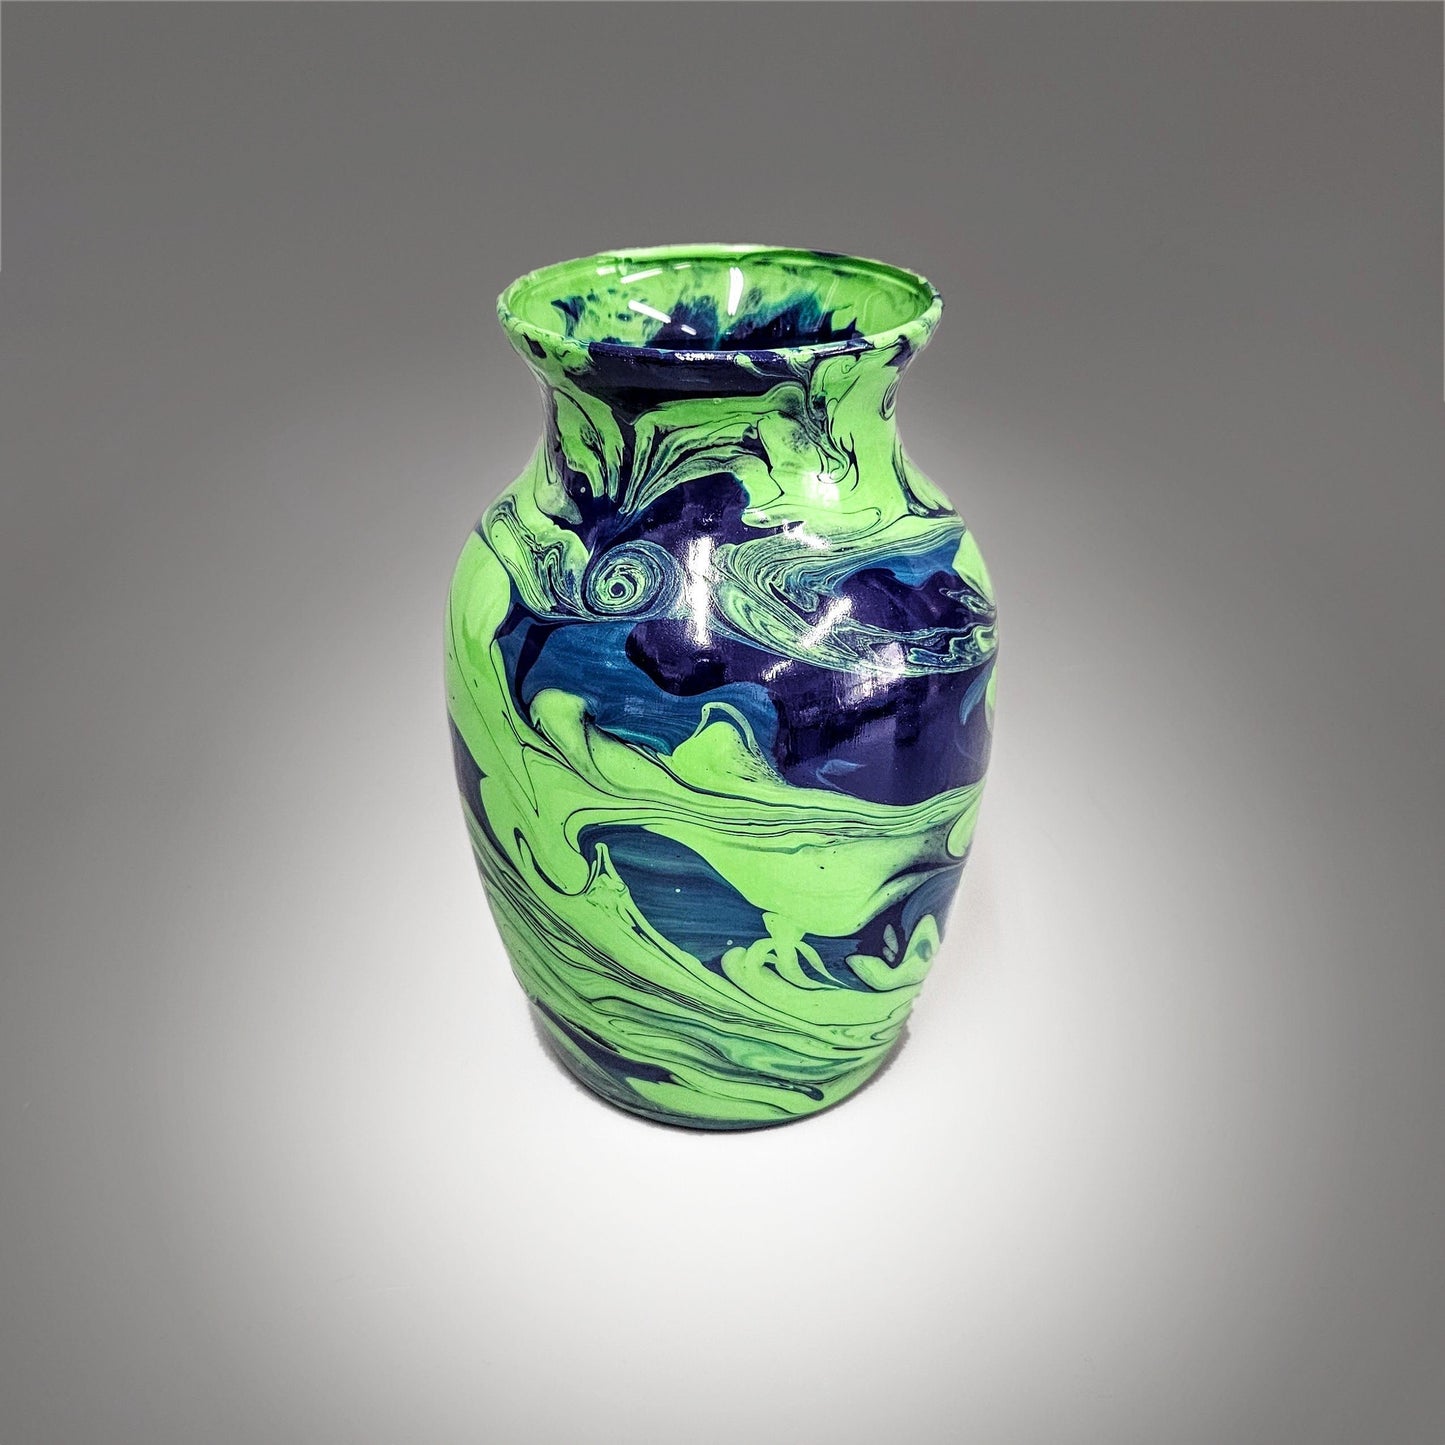 Painted Glass Vase in Spring Green and Navy Blue